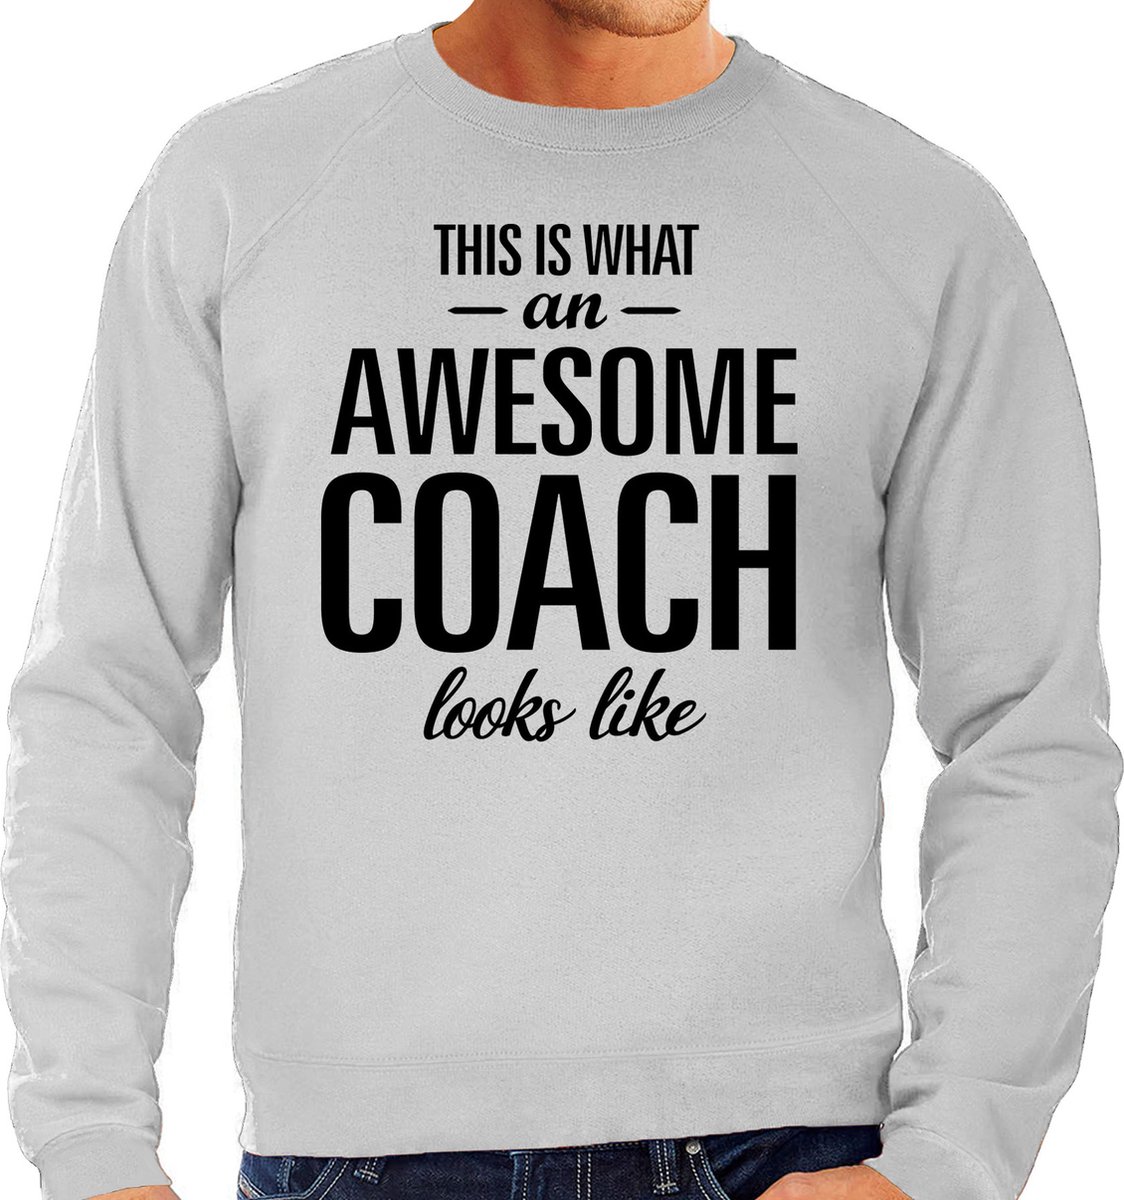 Afbeelding van product Bellatio Decorations  This is what an awesome coach looks like cadeau sweater grijs - heren - beroepen / cadeau trui S  - maat S